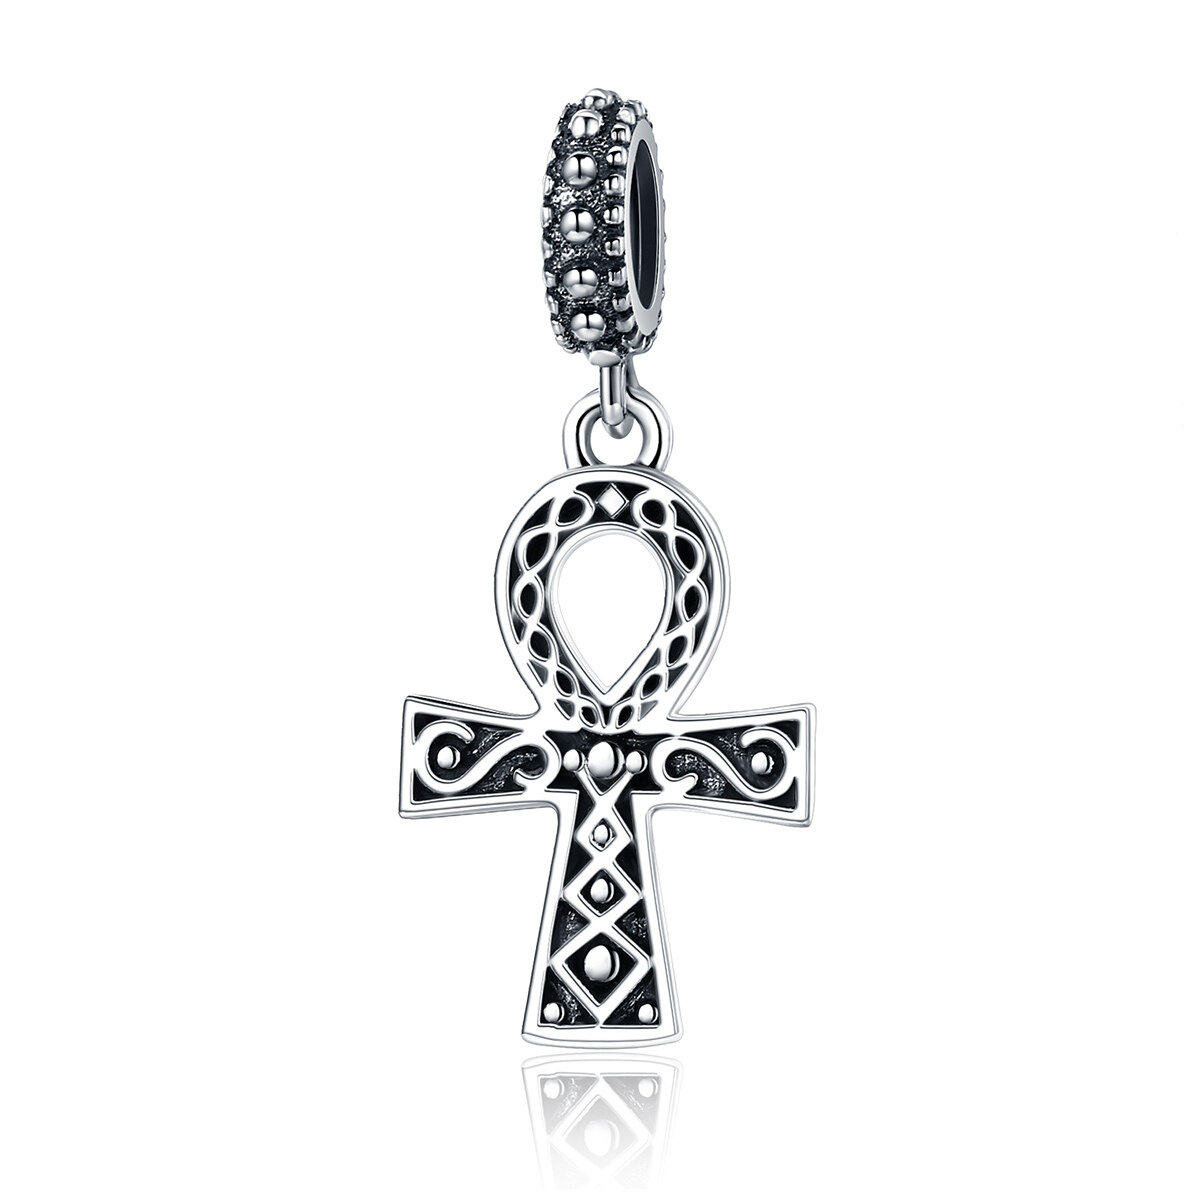 GemKing SCC185 The power of faith S925 Sterling Silver Charm